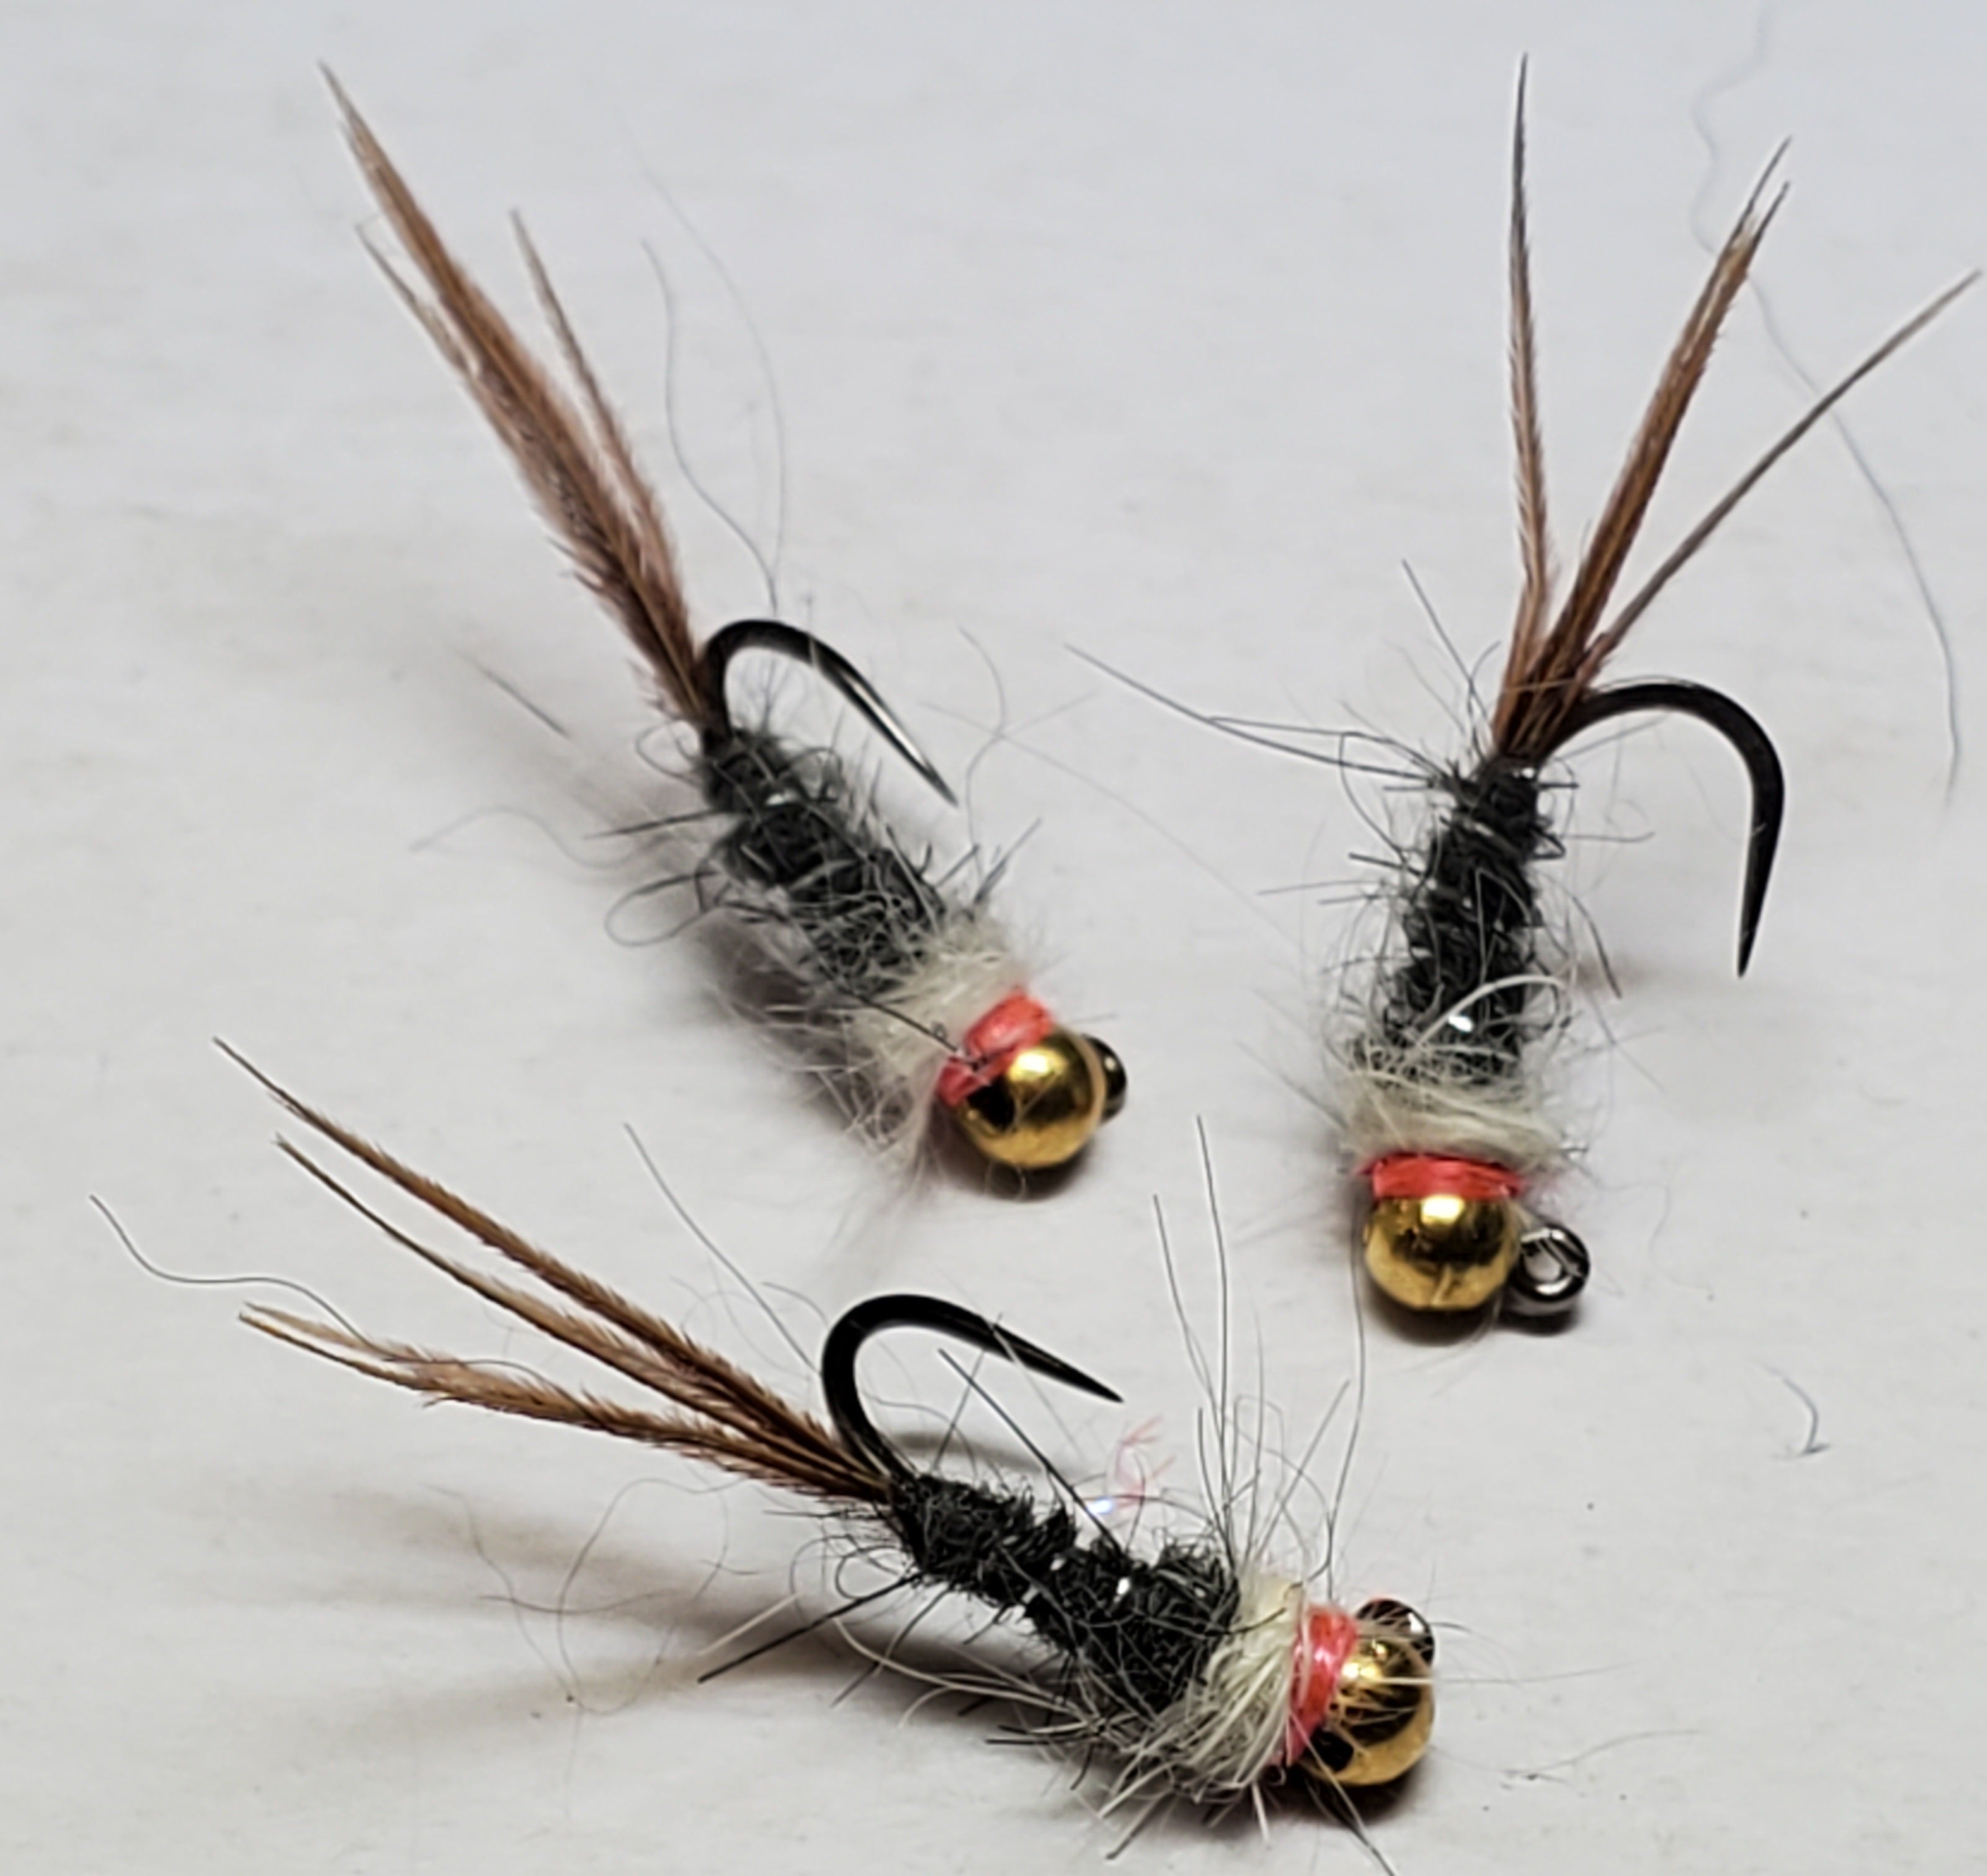 6 Tungsten Bead Head Jig Nymph Collection #8 - Fly Fishing Gear & Fly  Fishing Australia